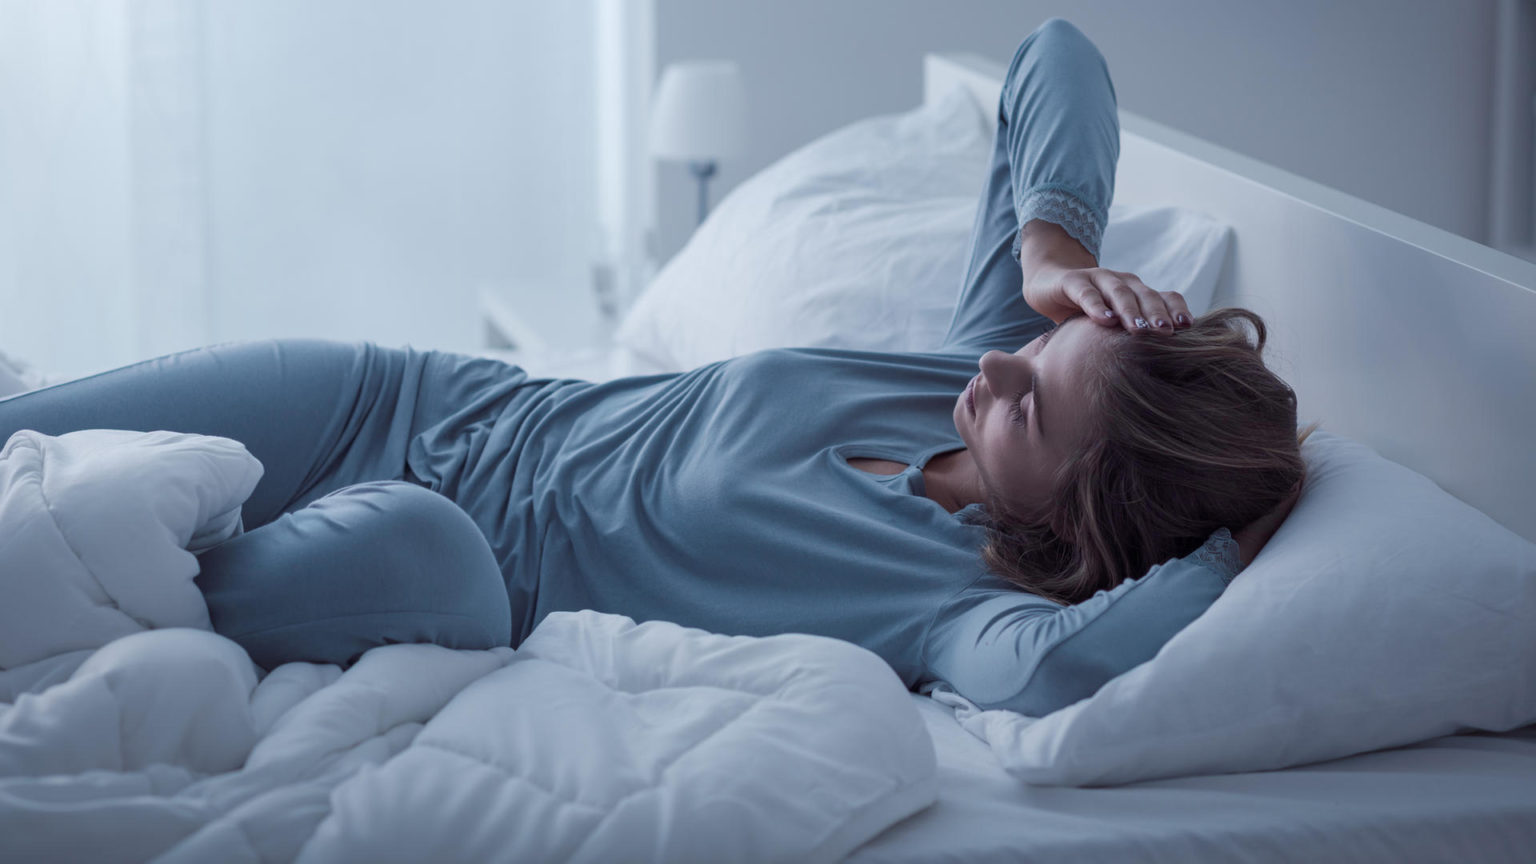 5 Ways To Stay Up Late And Avoid Feeling Sleepy